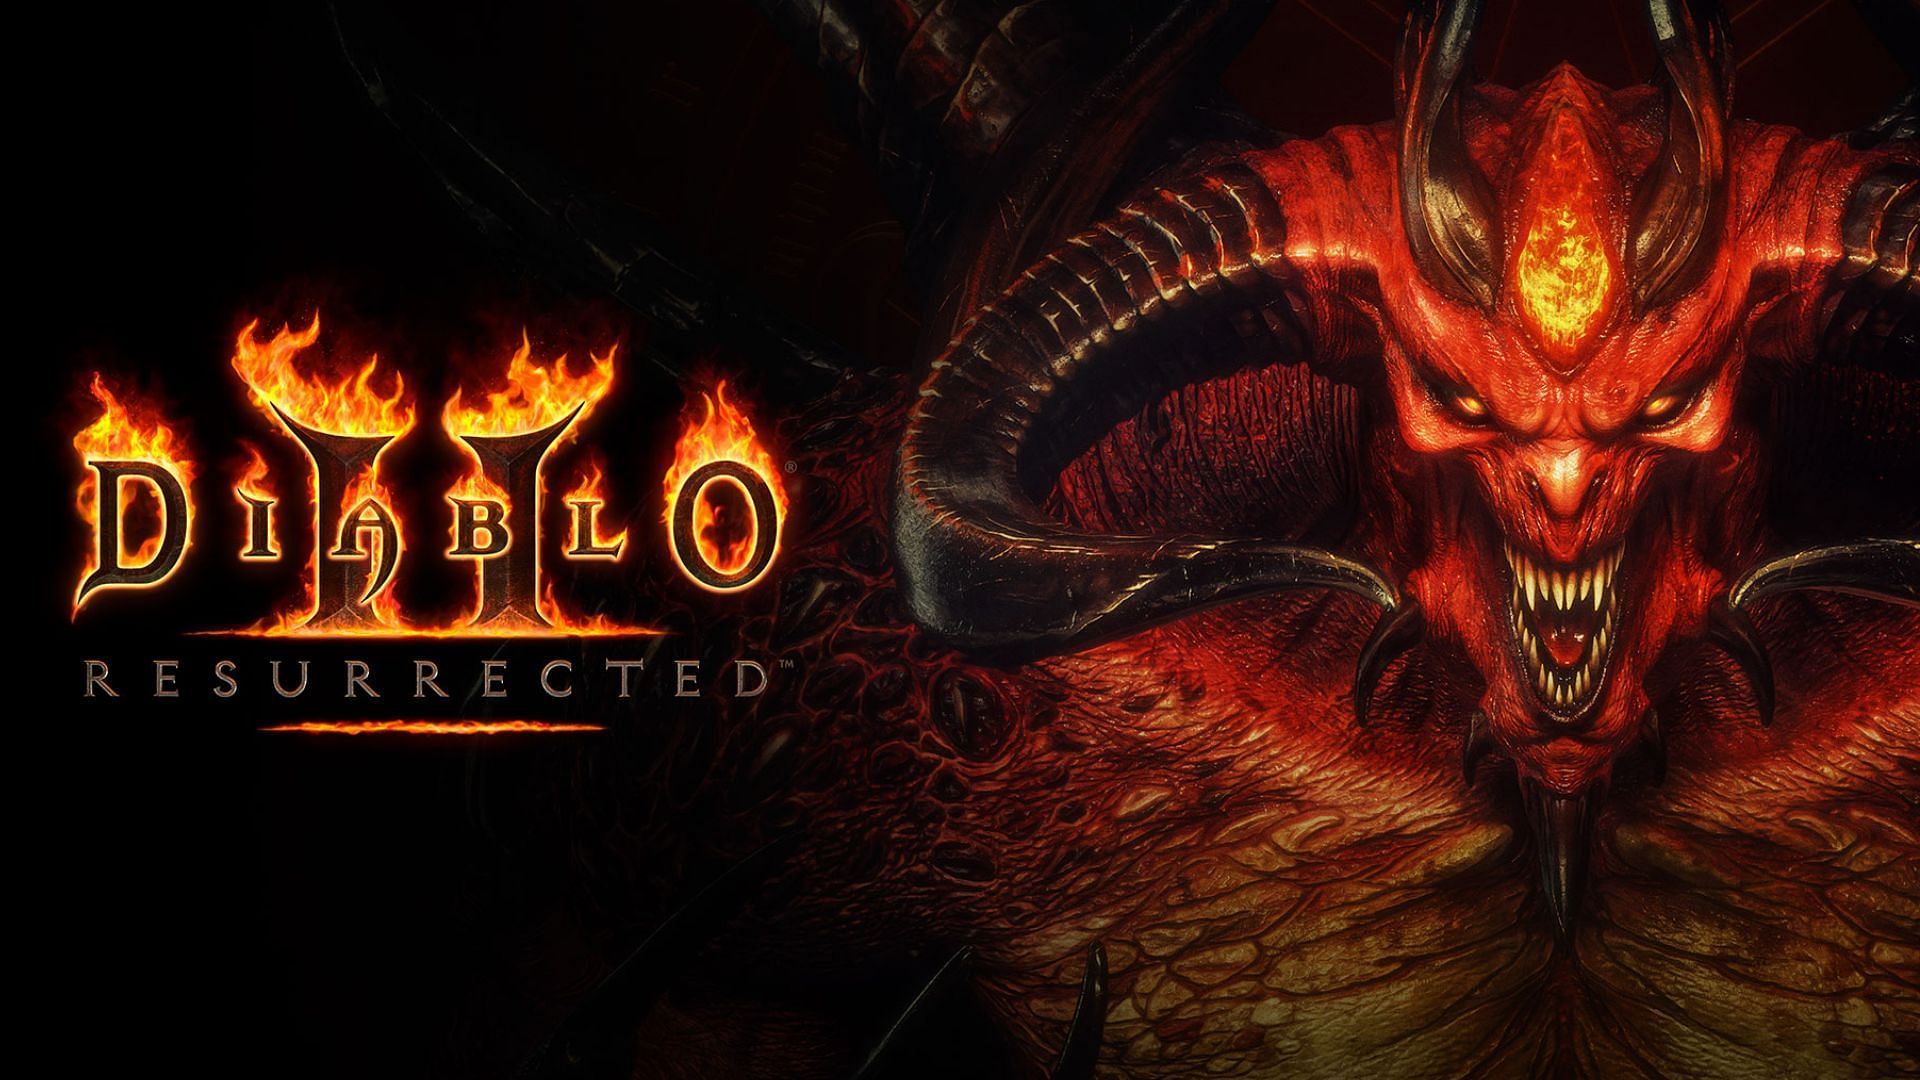 Why is Diablo 2 called one of the best PC games? (Blizzard Entertainment)